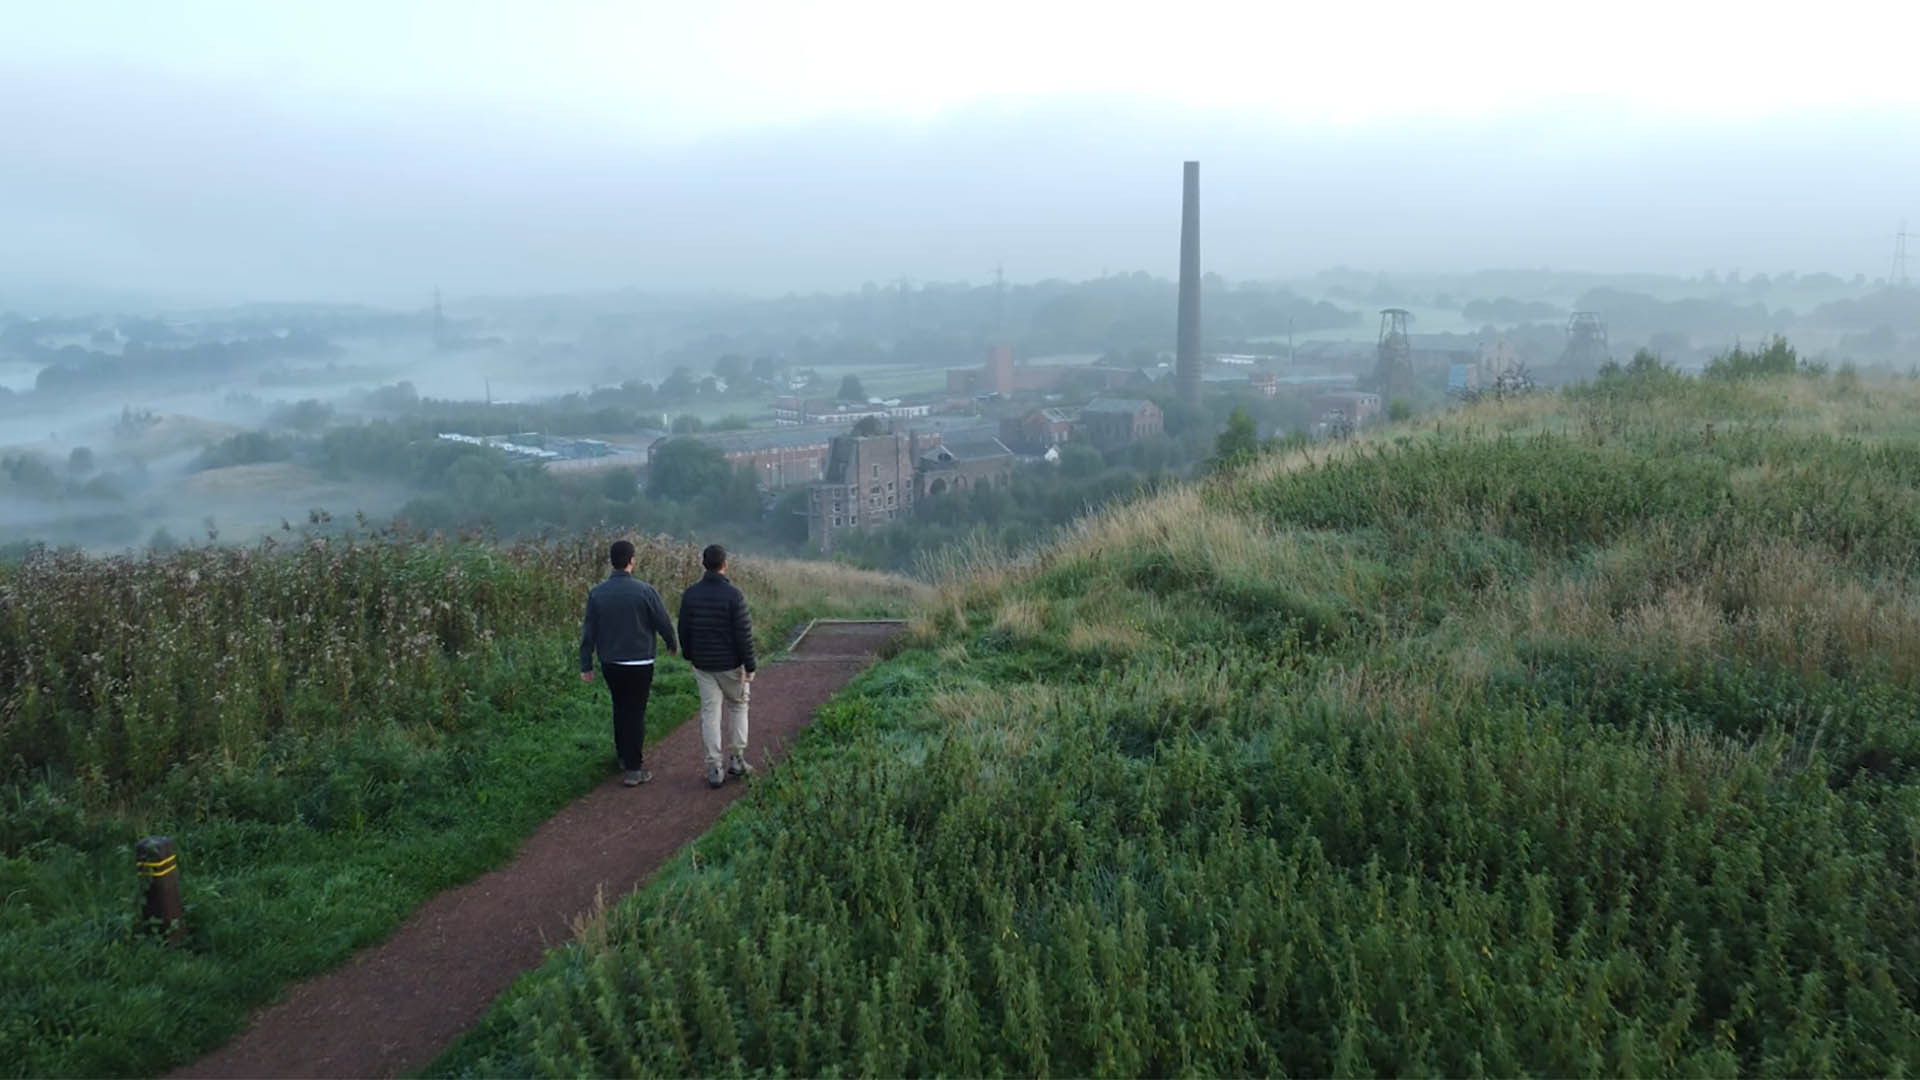 Yussef and Dan walk towards Chatterley Whitfield